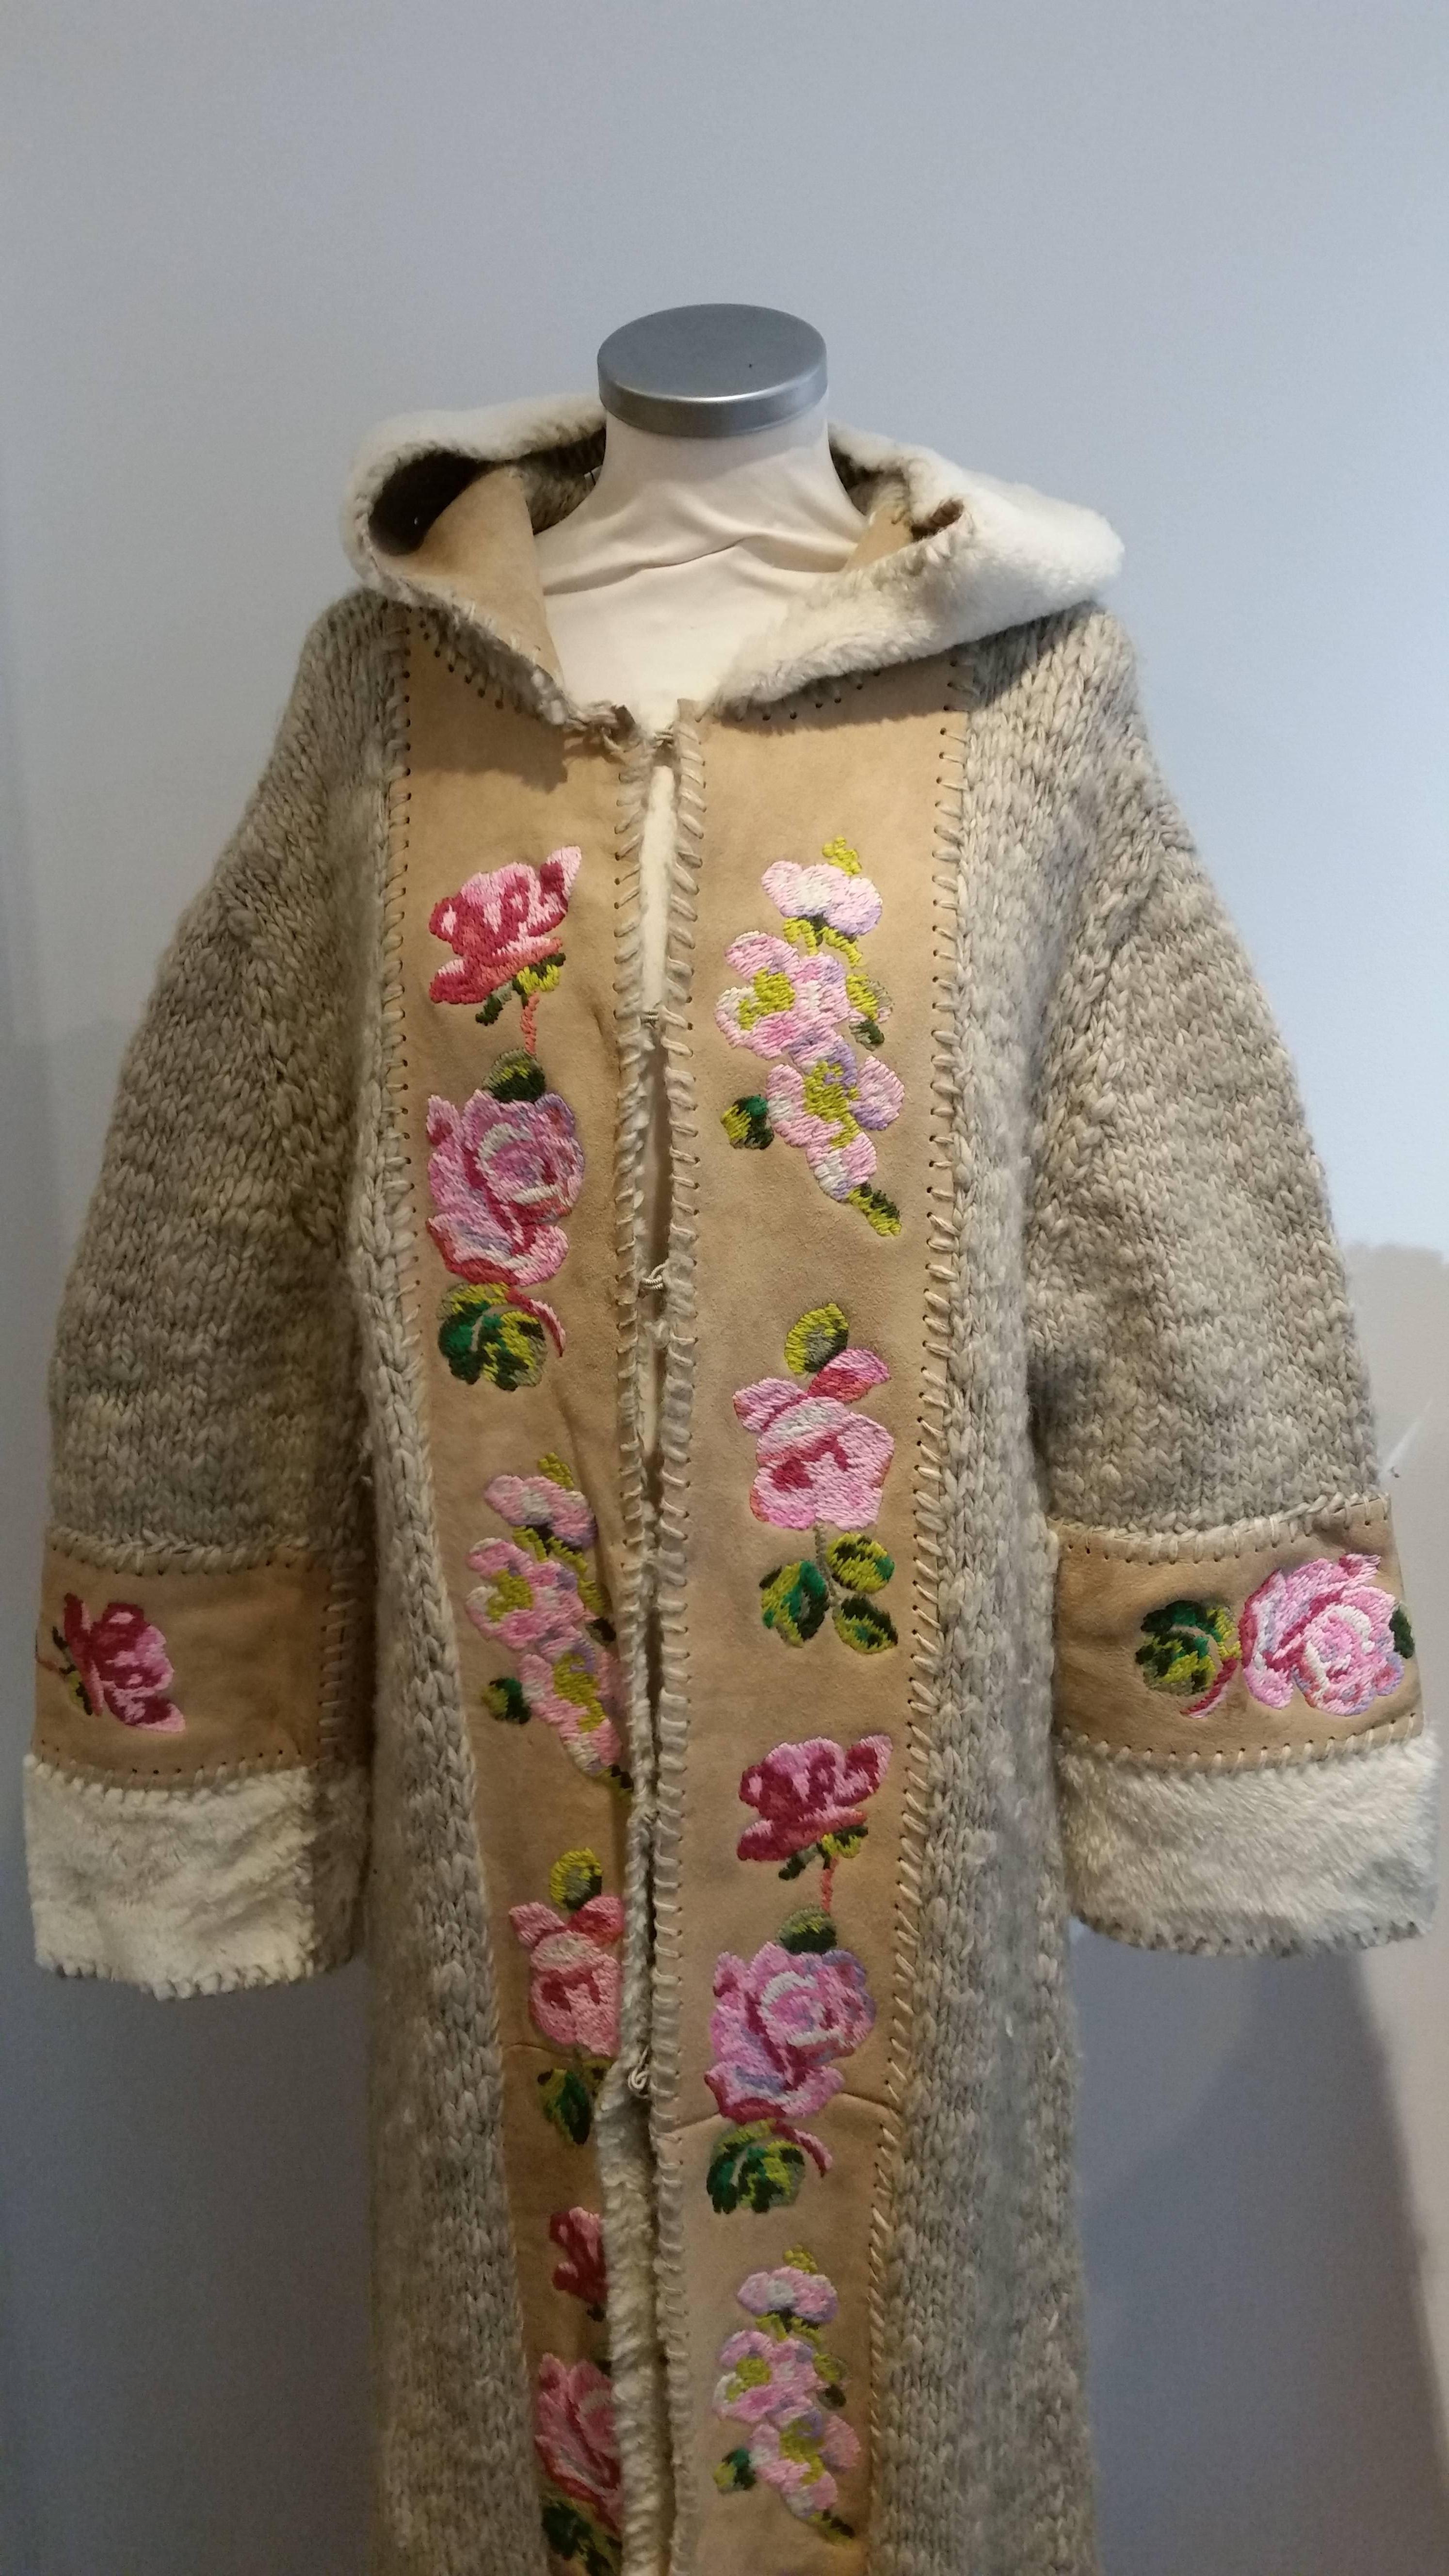 CHRISTIAN DIOR EMBROIDERED NAVAJO  STYLE COAT WITH SHEEPSKIN could be in the new Christian Dior 2018 Cruise Collection as this coat is similar. Perfect worn with boots/apres ski wear.
Navajo style coloured embroidery.
Edged with sheepskin
Size Large